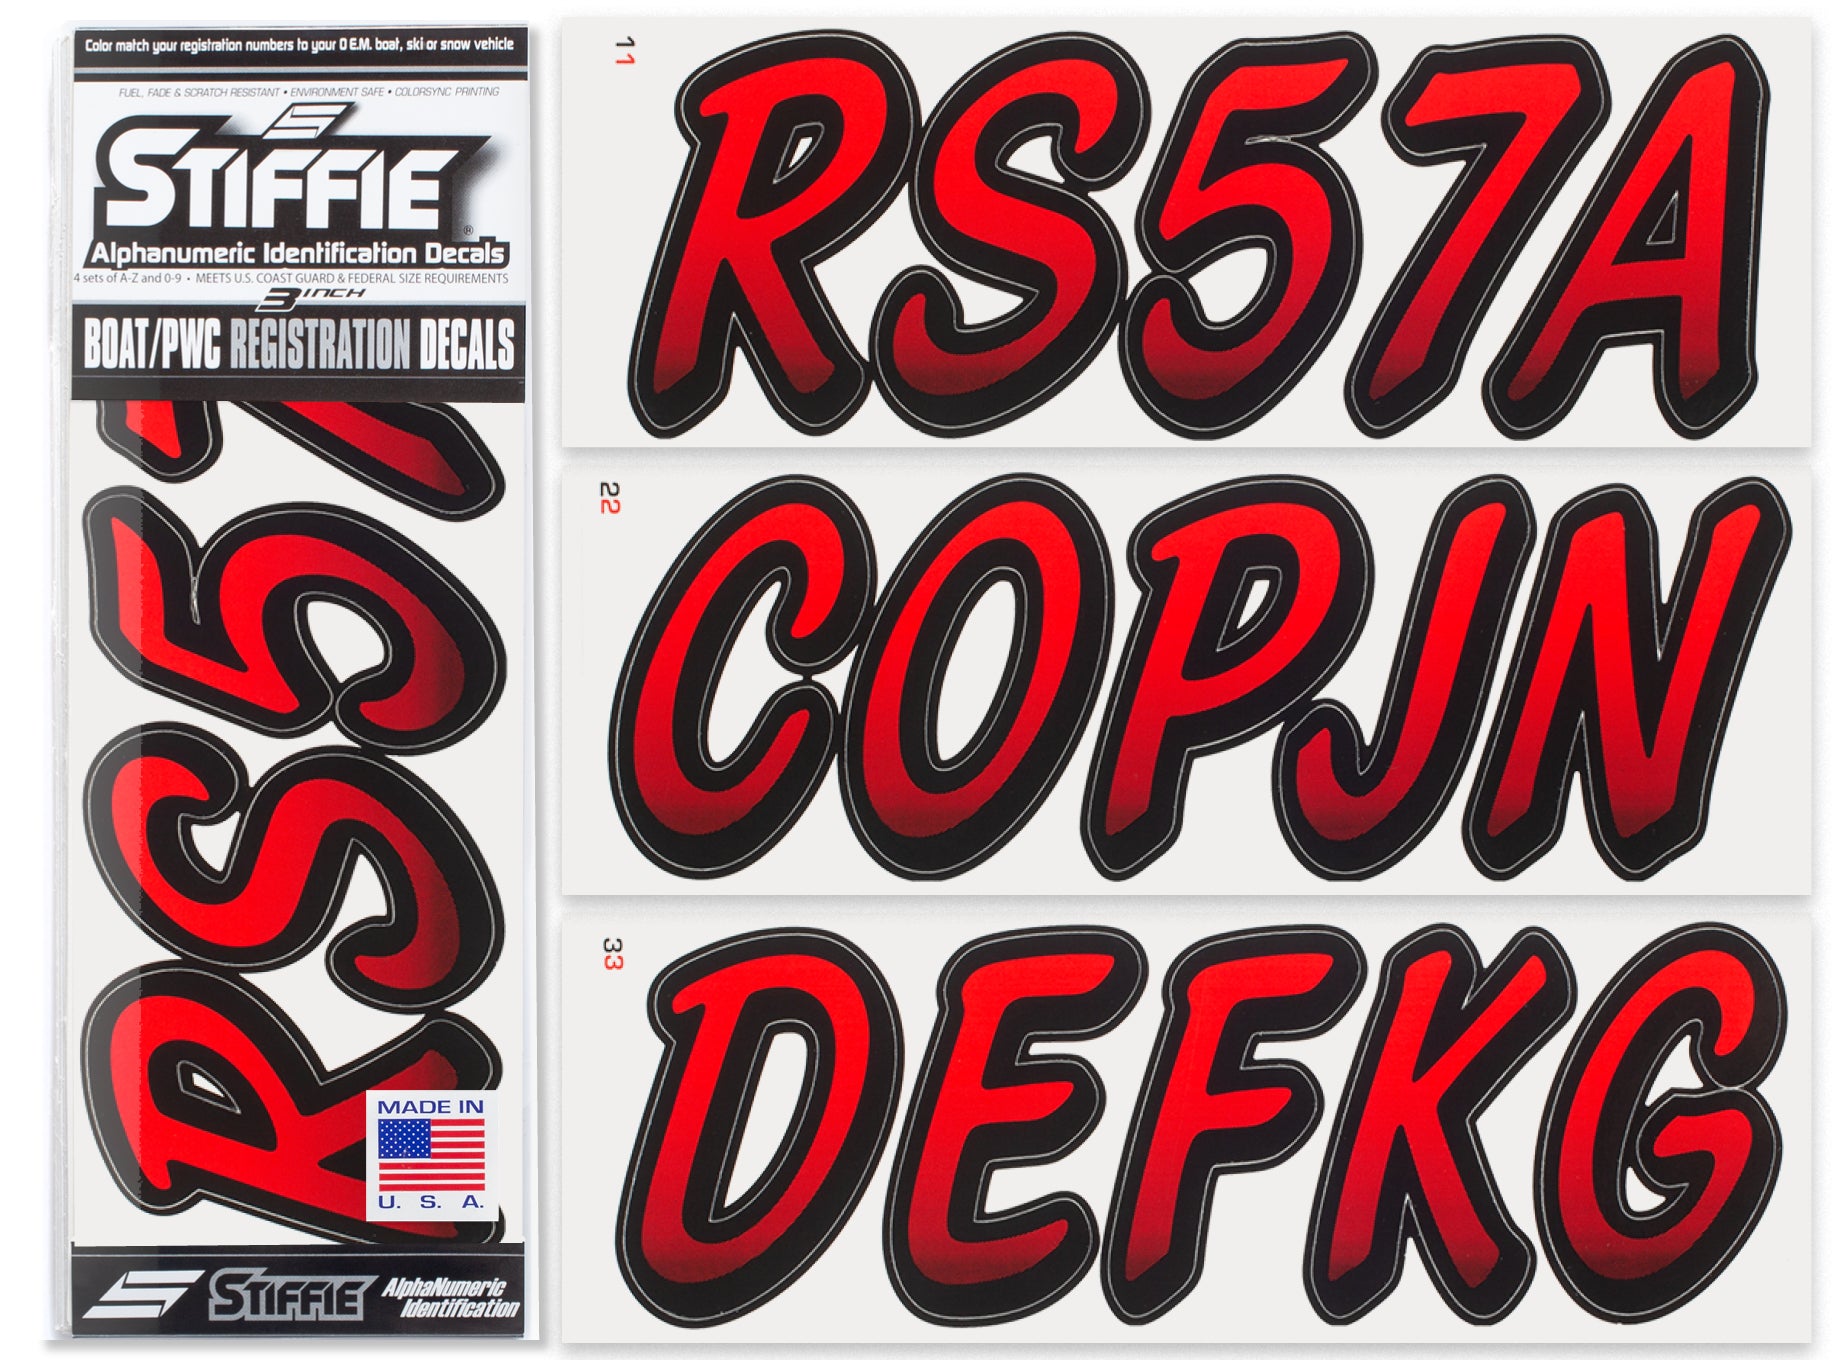 Stiffie Whipline Red/Black 3" Alpha-Numeric Registration Identification Numbers Stickers Decals for Boats & Personal Watercraft